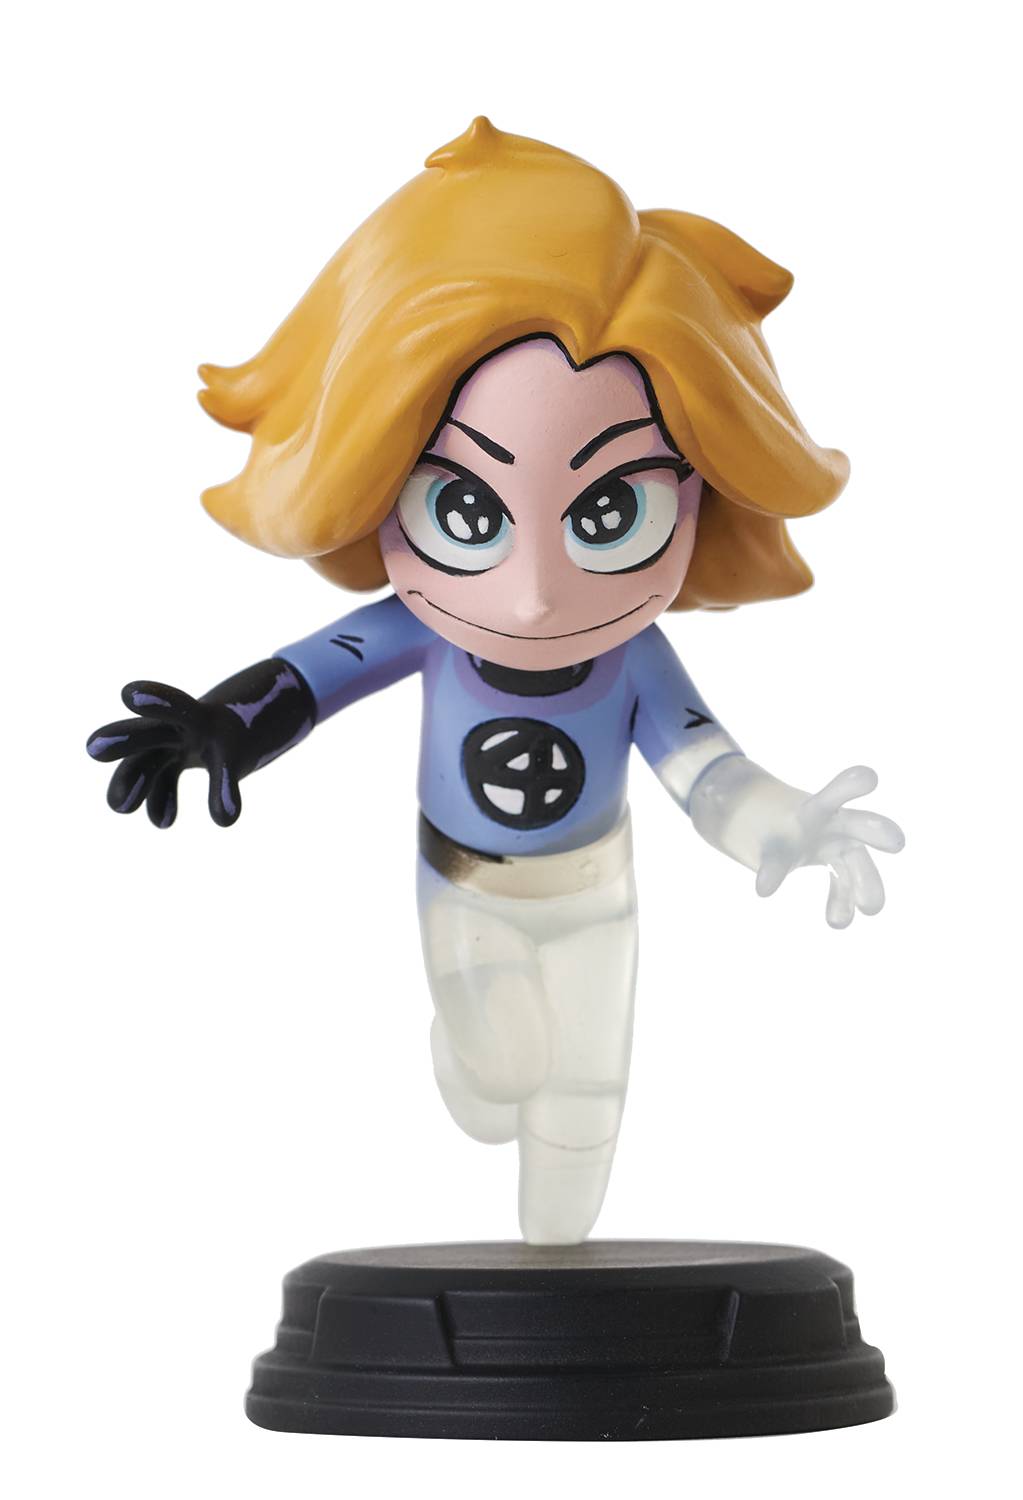 MARVEL ANIMATED STYLE SUE STORM STATUE